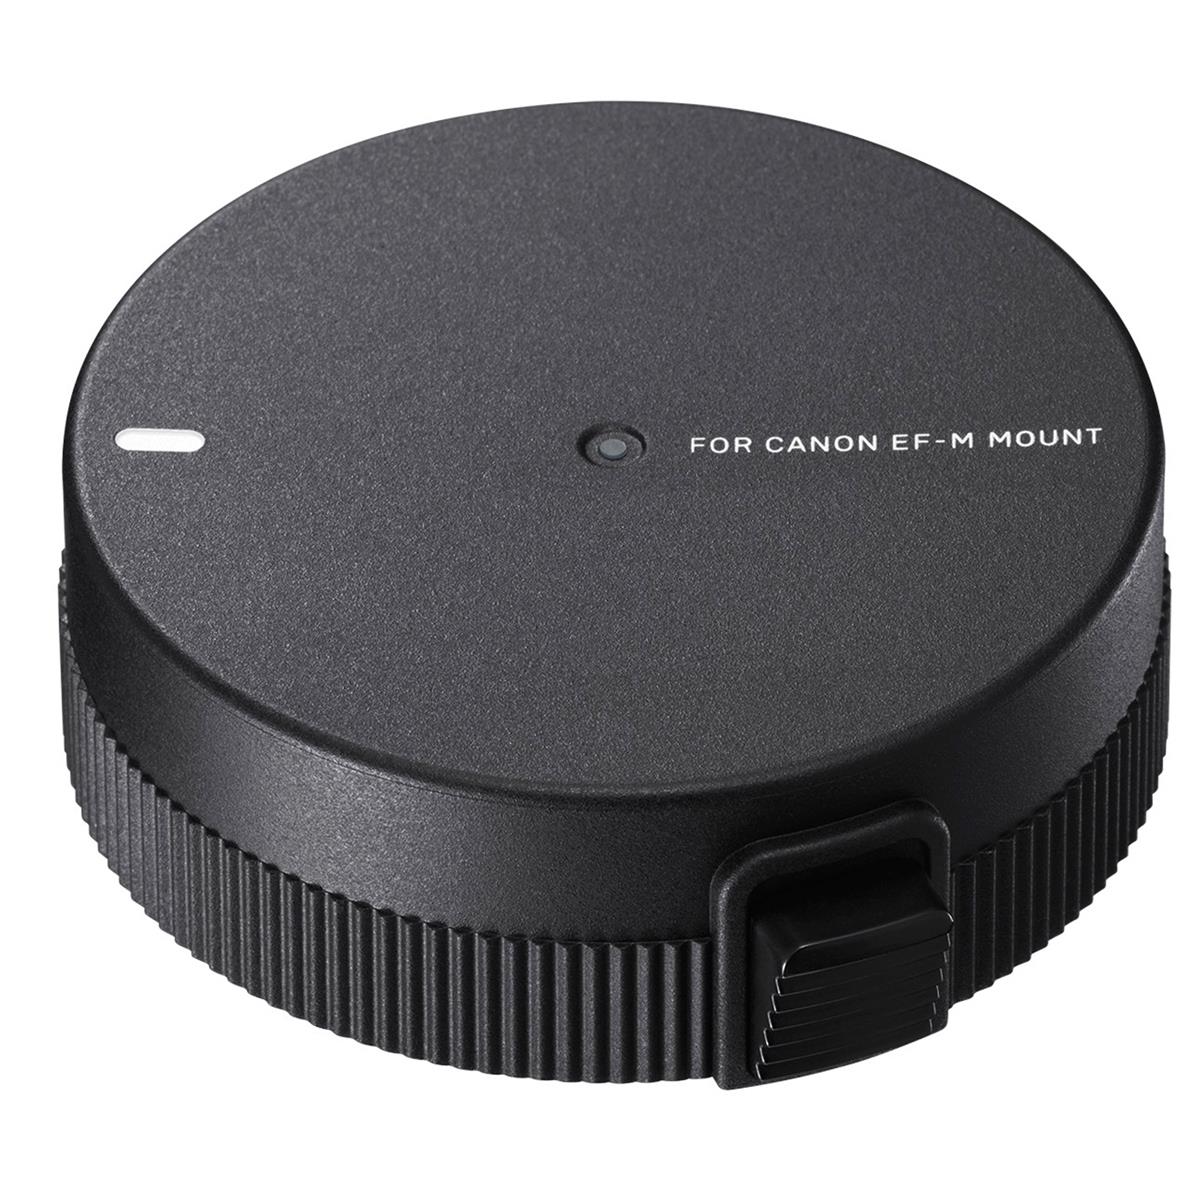 Image of Sigma UD-11 USB Dock for Canon EF-M Lens